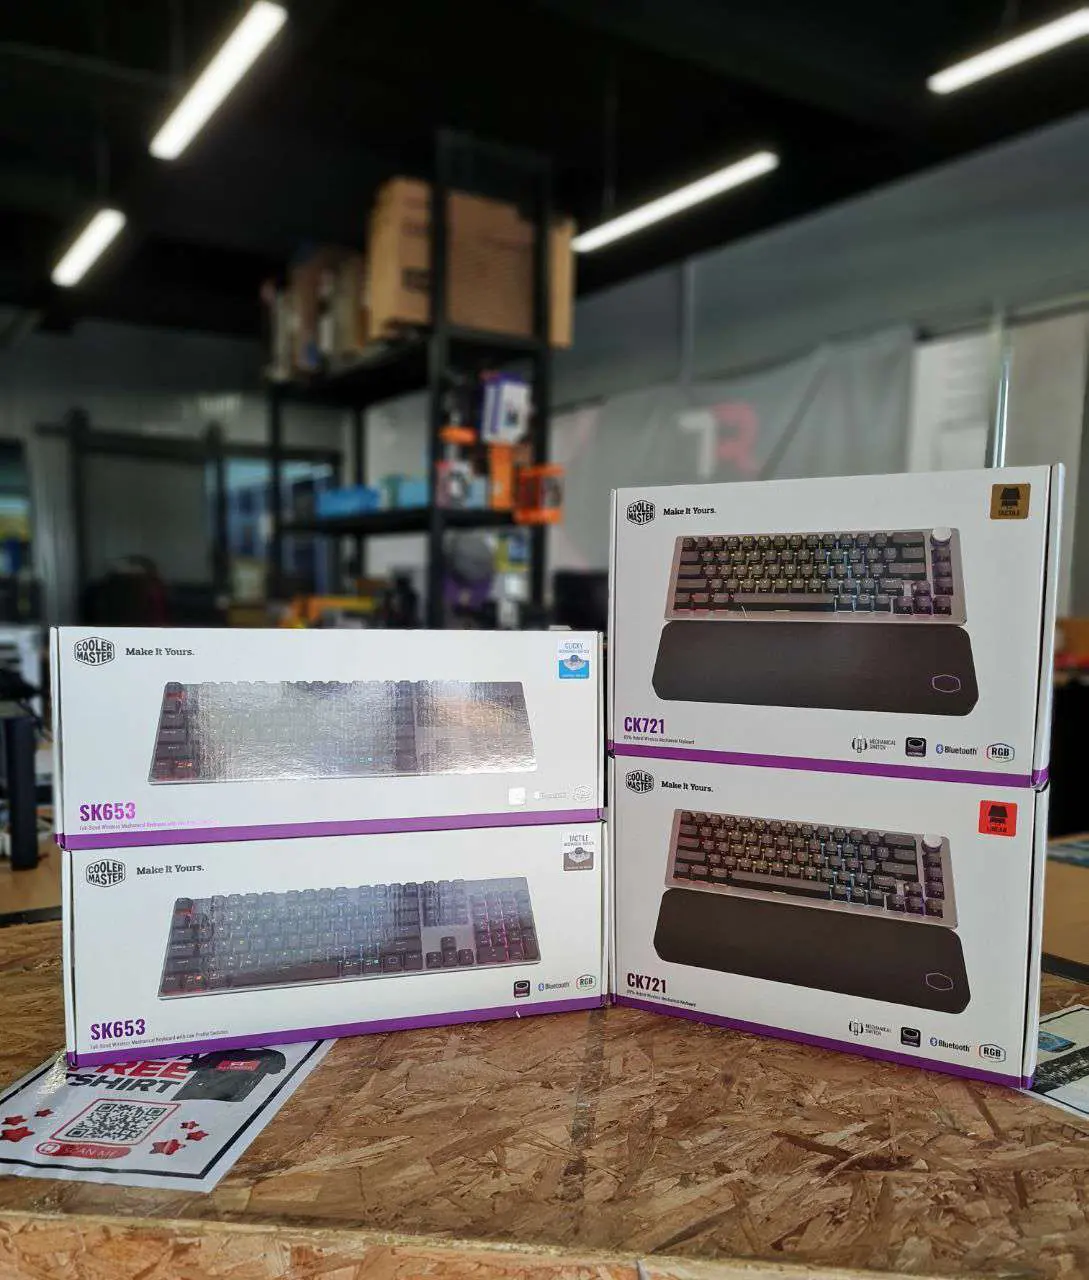 New Stock Keyboards